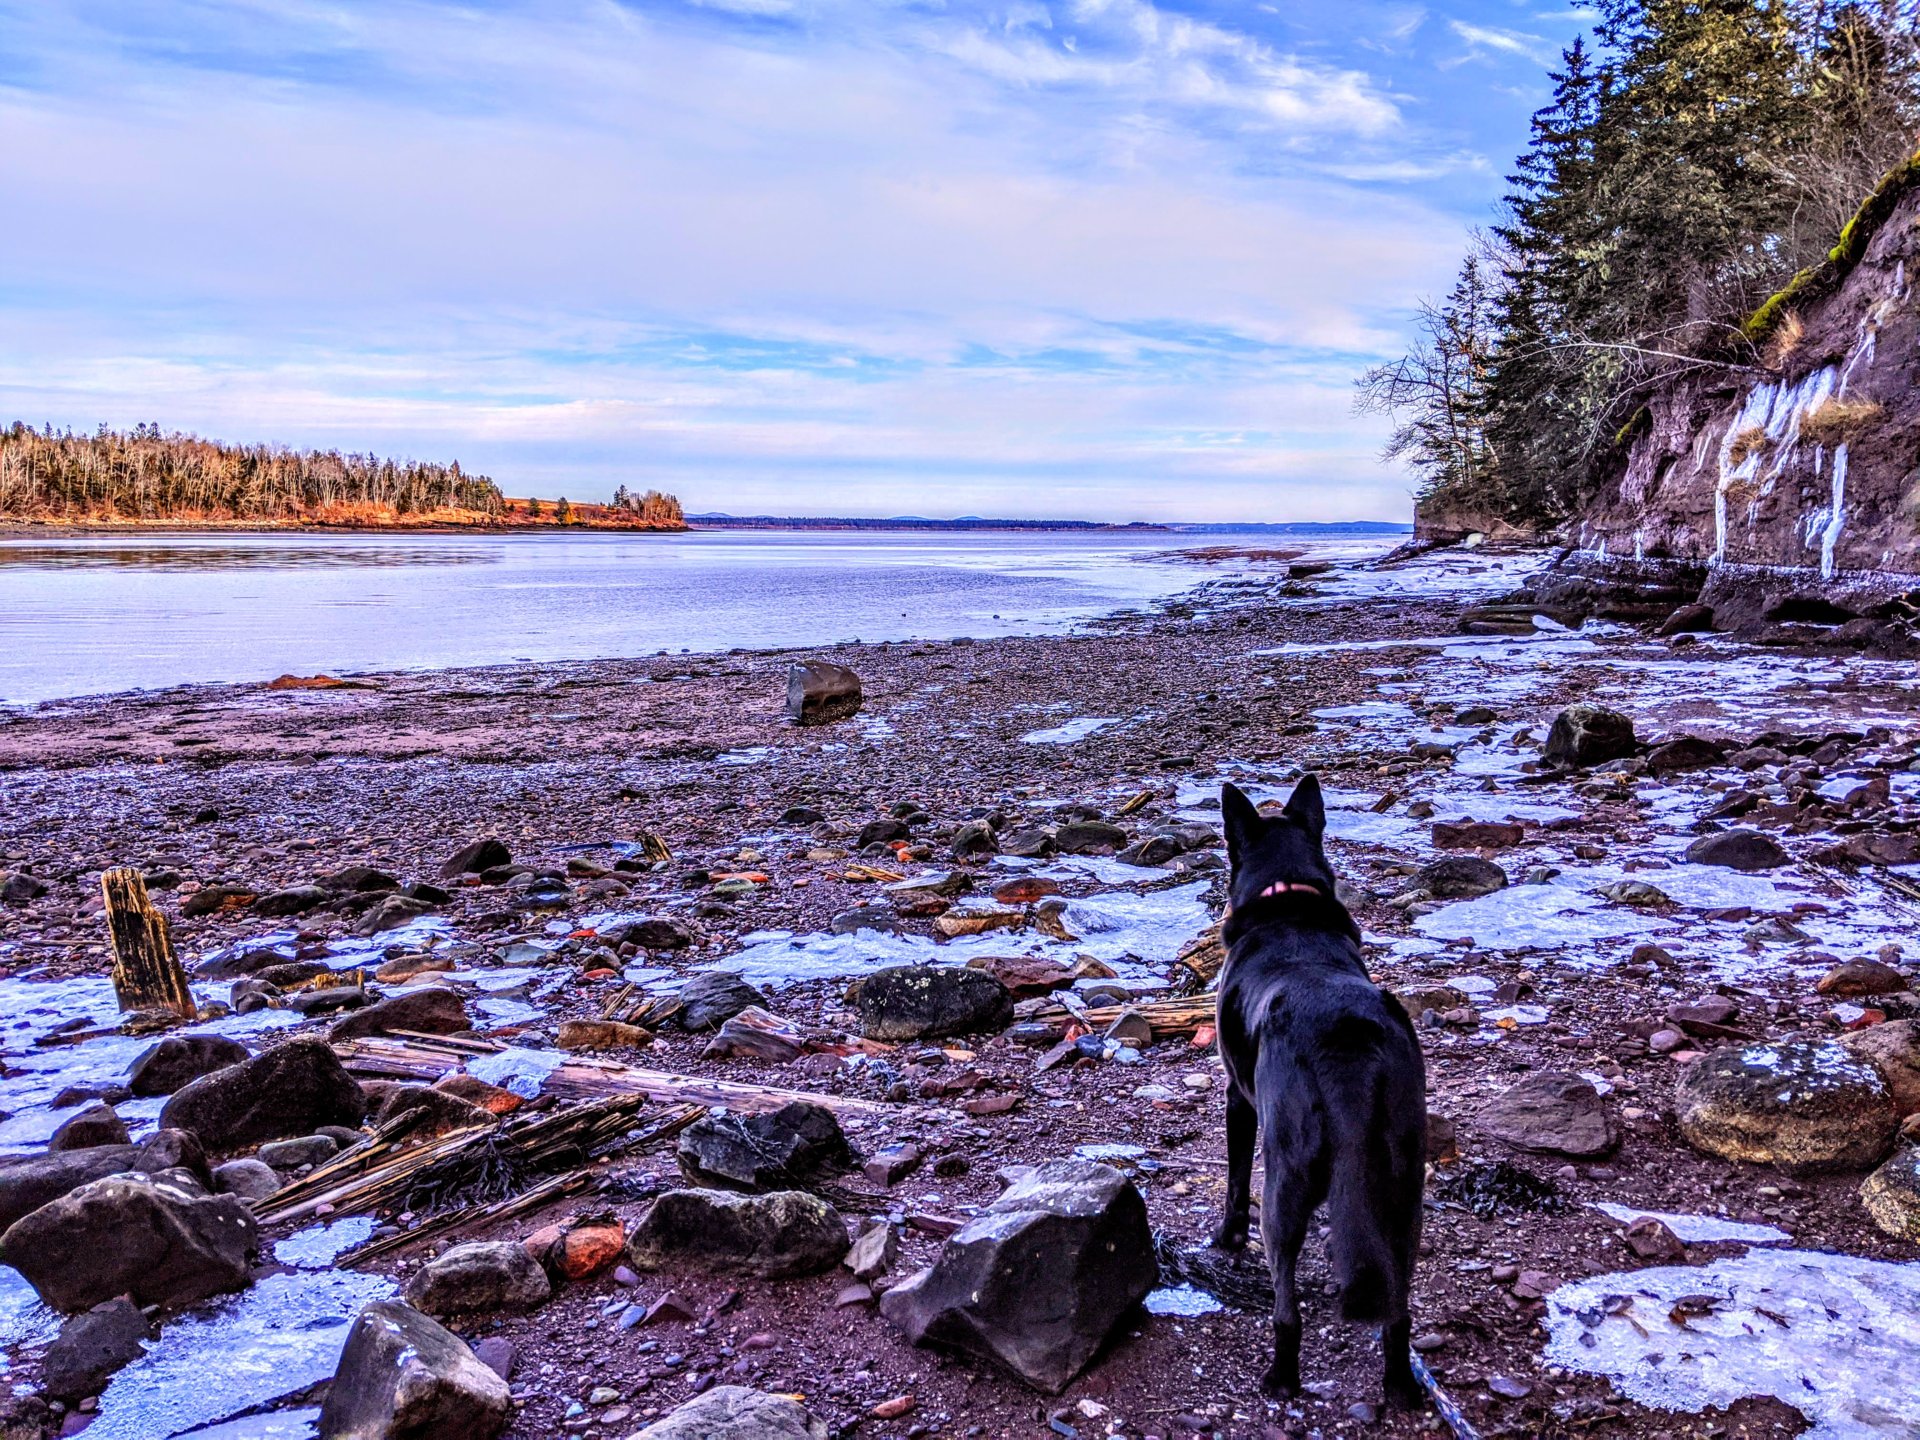 ice on Lewis's cove in Perry, Maine, Dec 2019. With Sam my best buddy, black dog